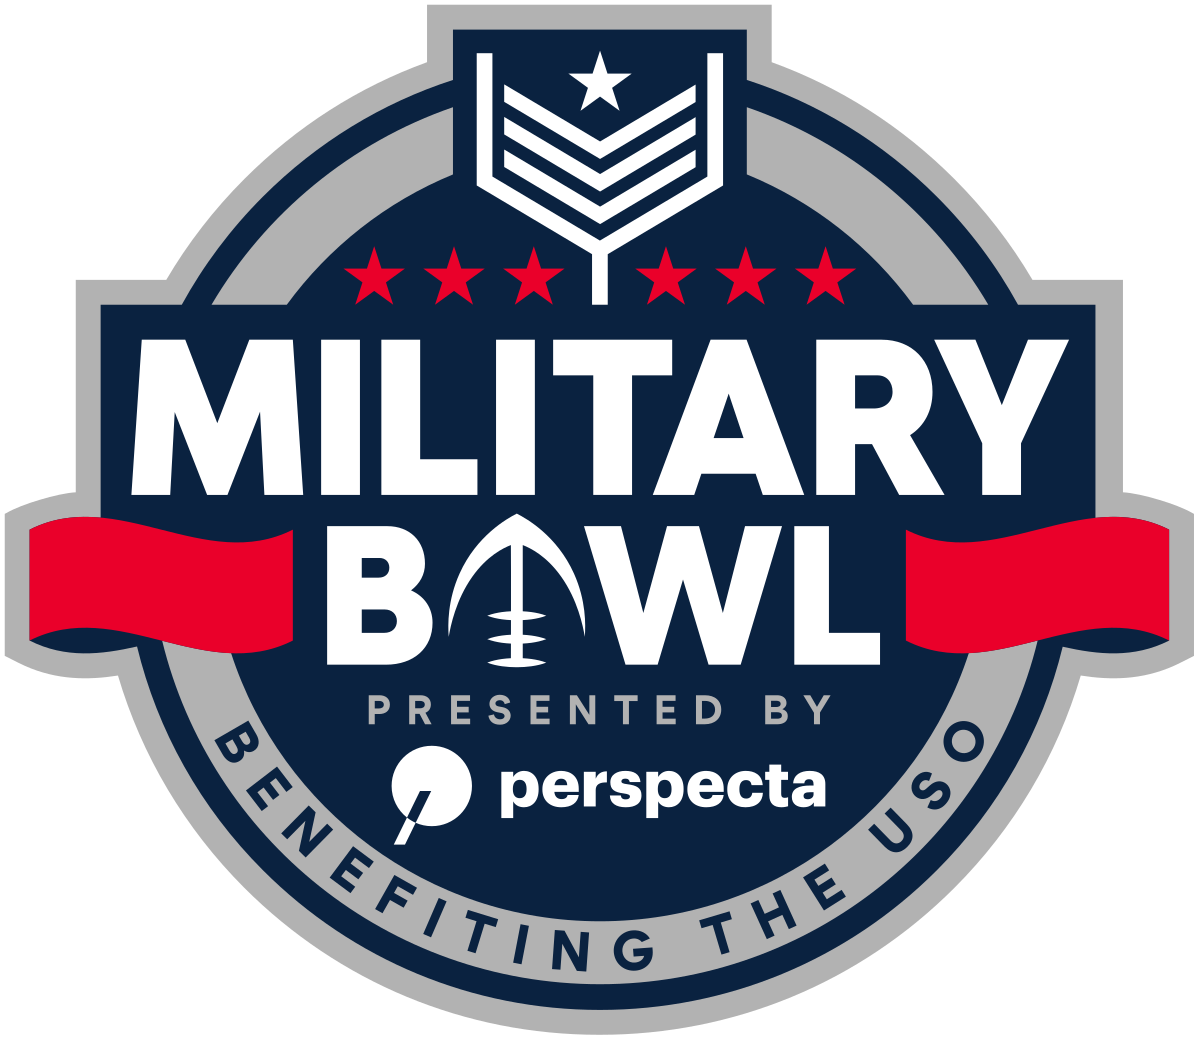 Complete Guide to Watch Military Bowl 2020 Live Stream Anywhere